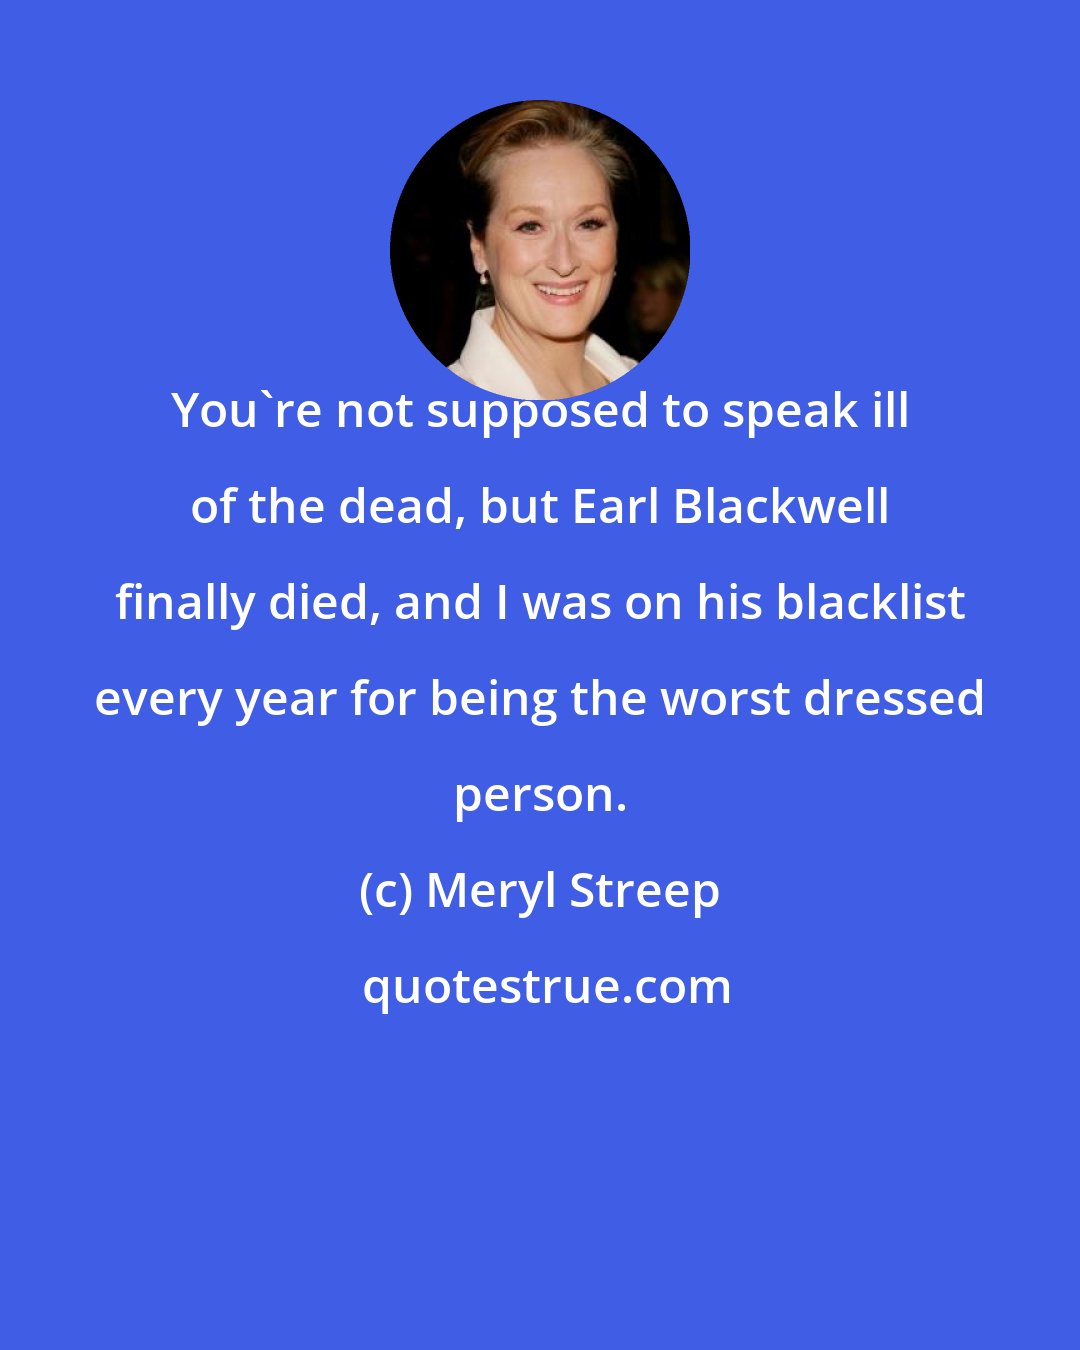 Meryl Streep: You're not supposed to speak ill of the dead, but Earl Blackwell finally died, and I was on his blacklist every year for being the worst dressed person.